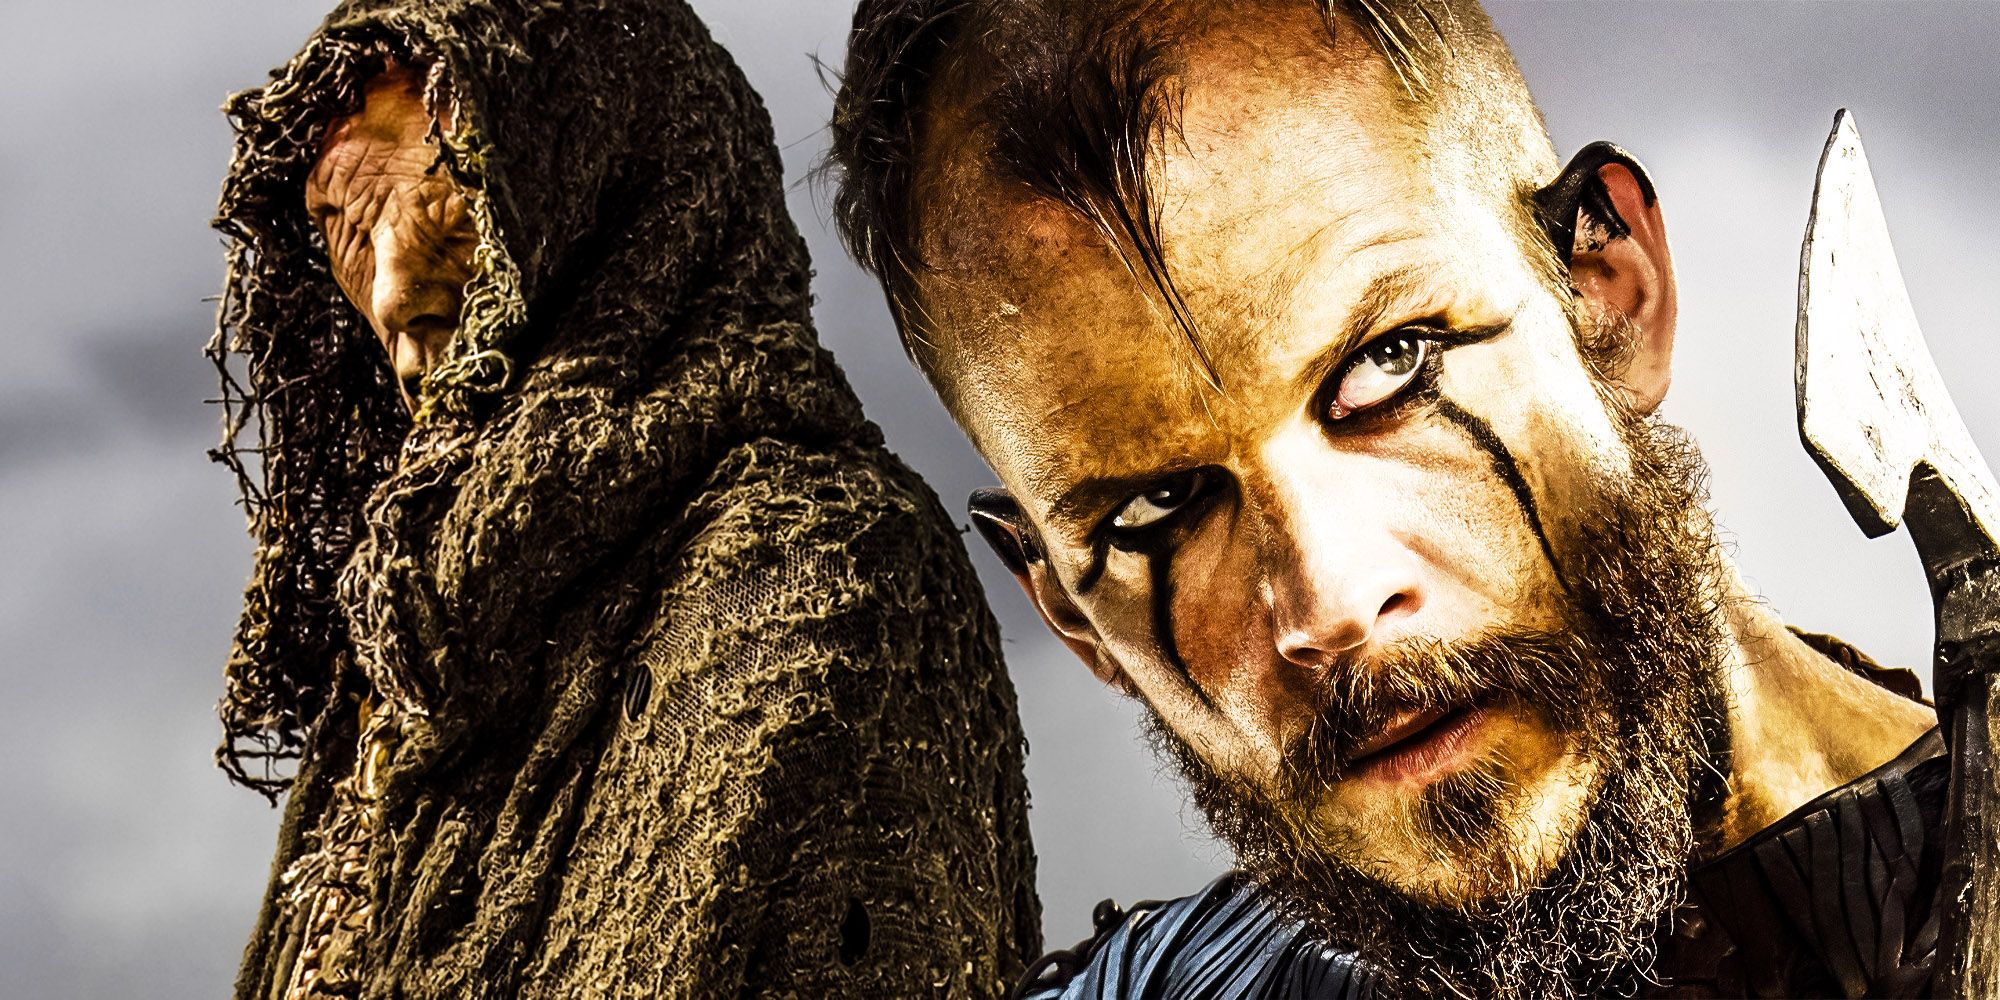 Why did the seer lick Floki's palm?